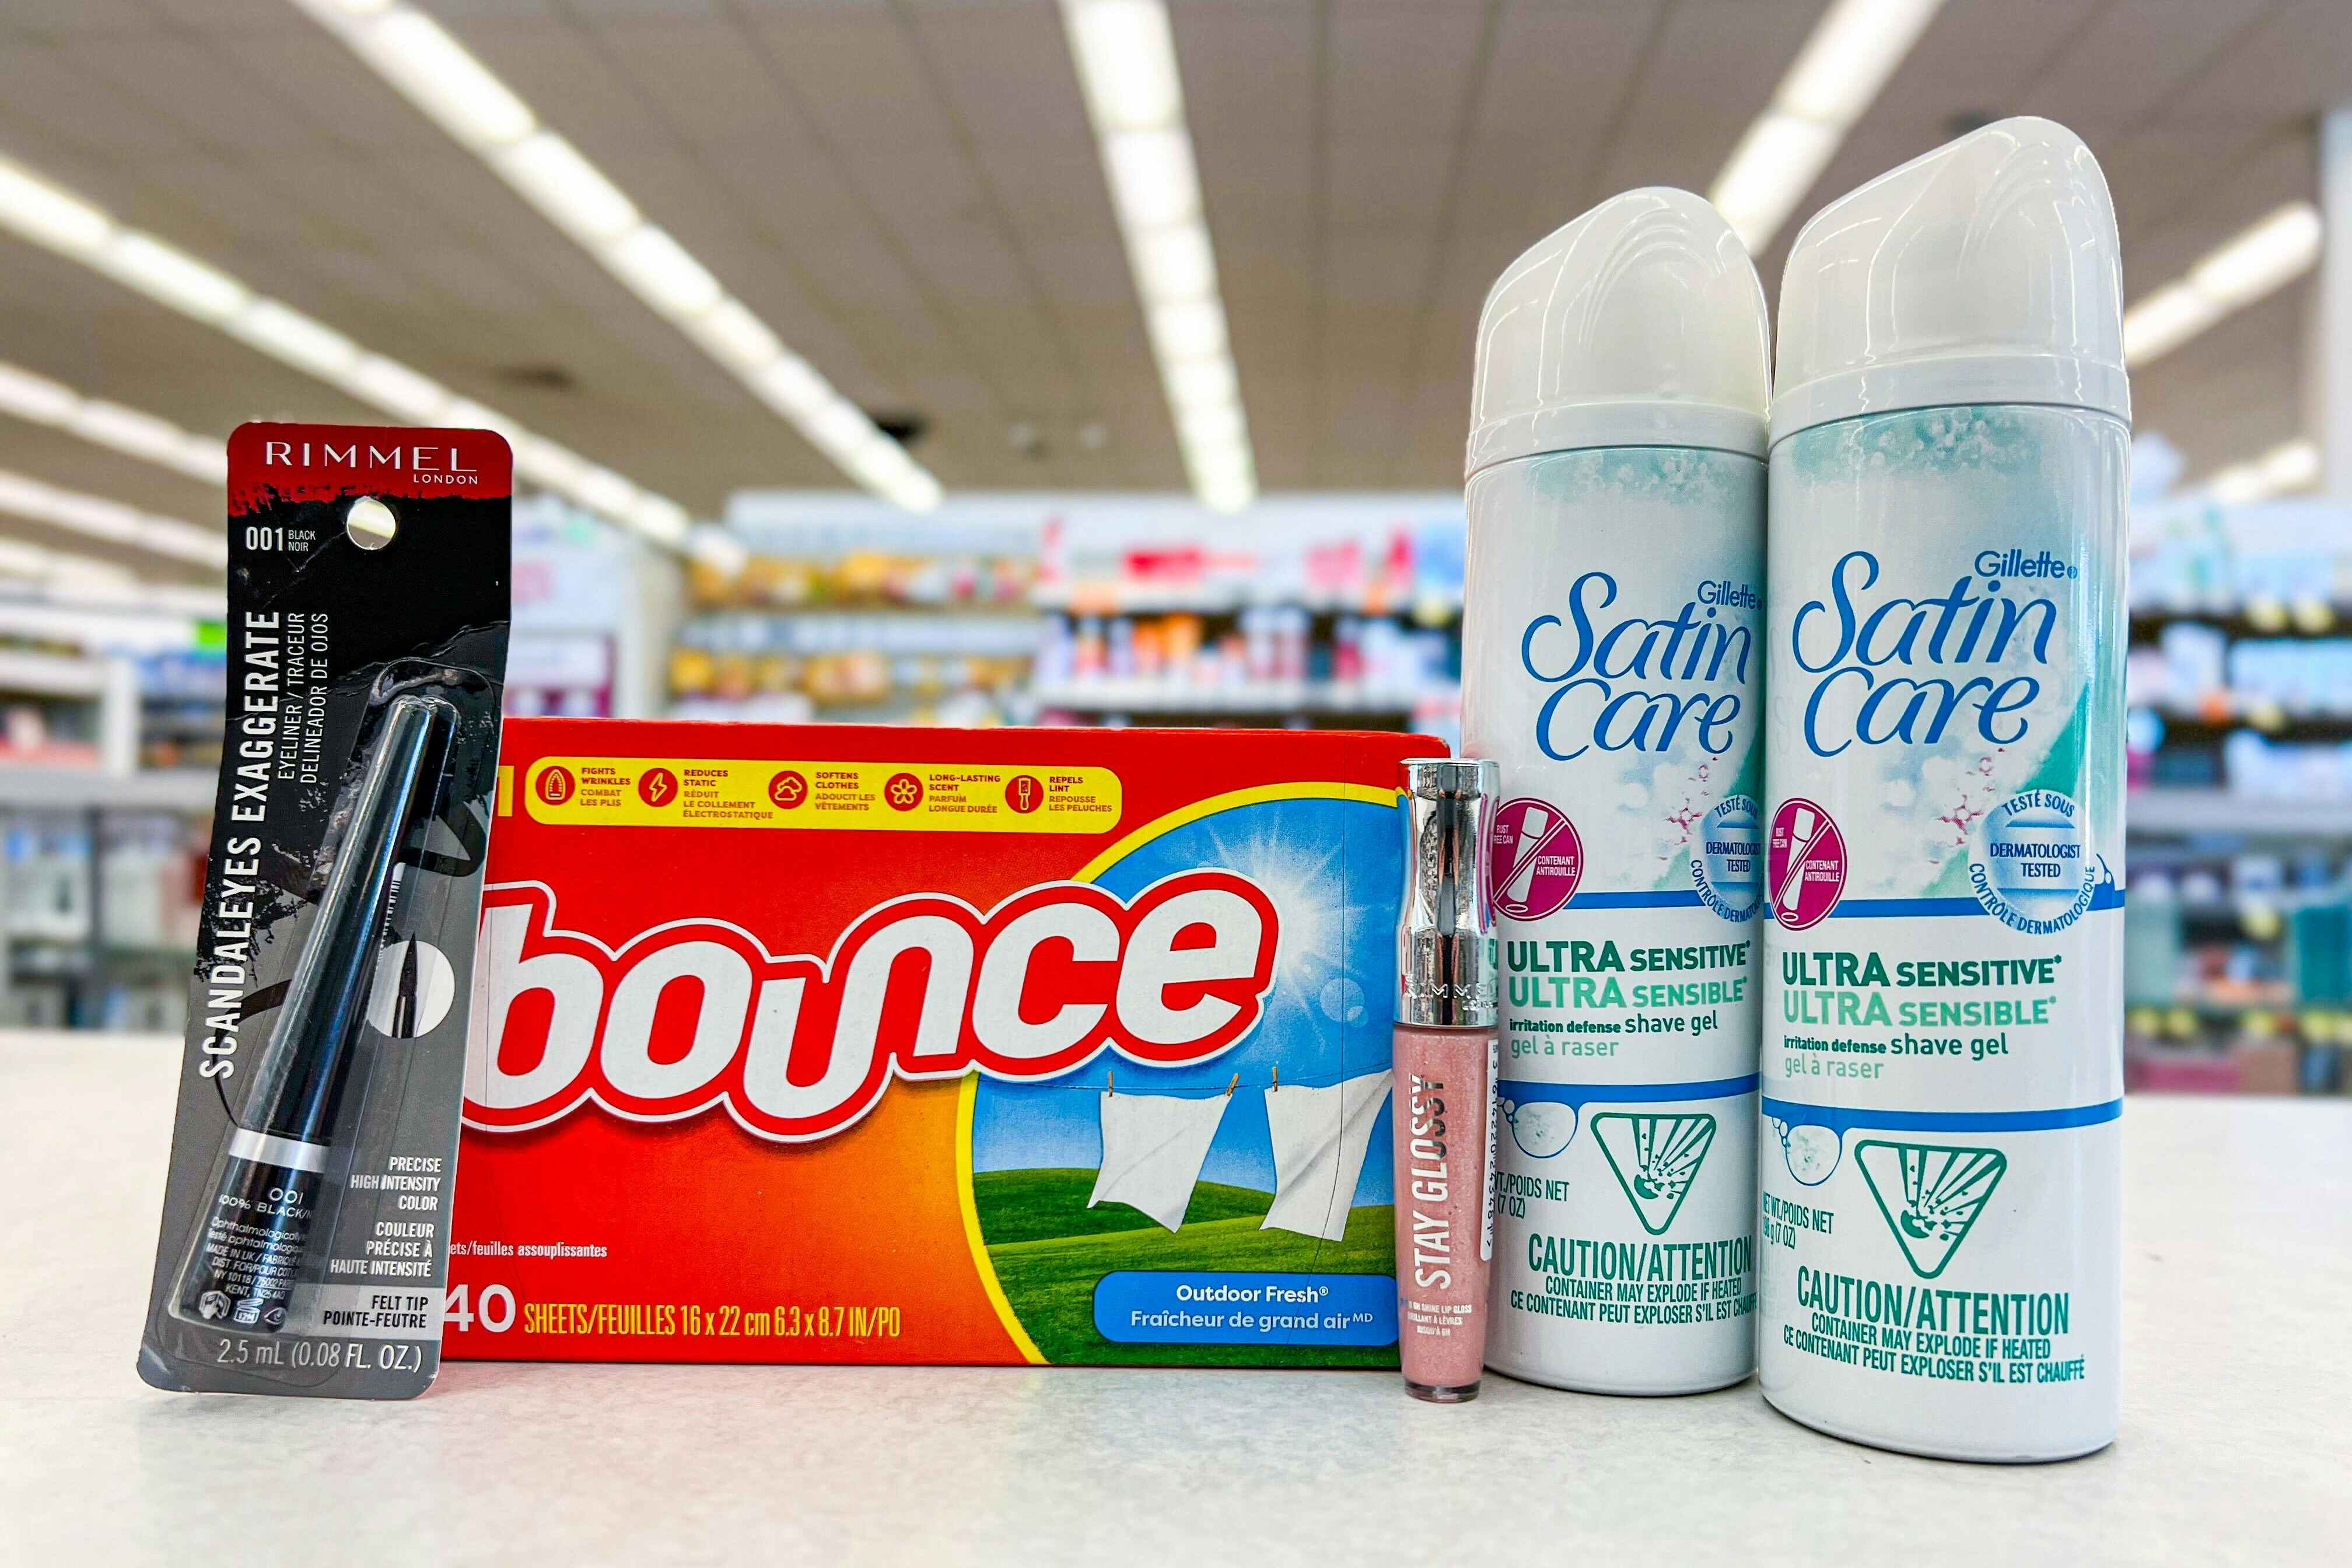 Free Downy, Gillette, Bounce, and Rimmel at Walgreens